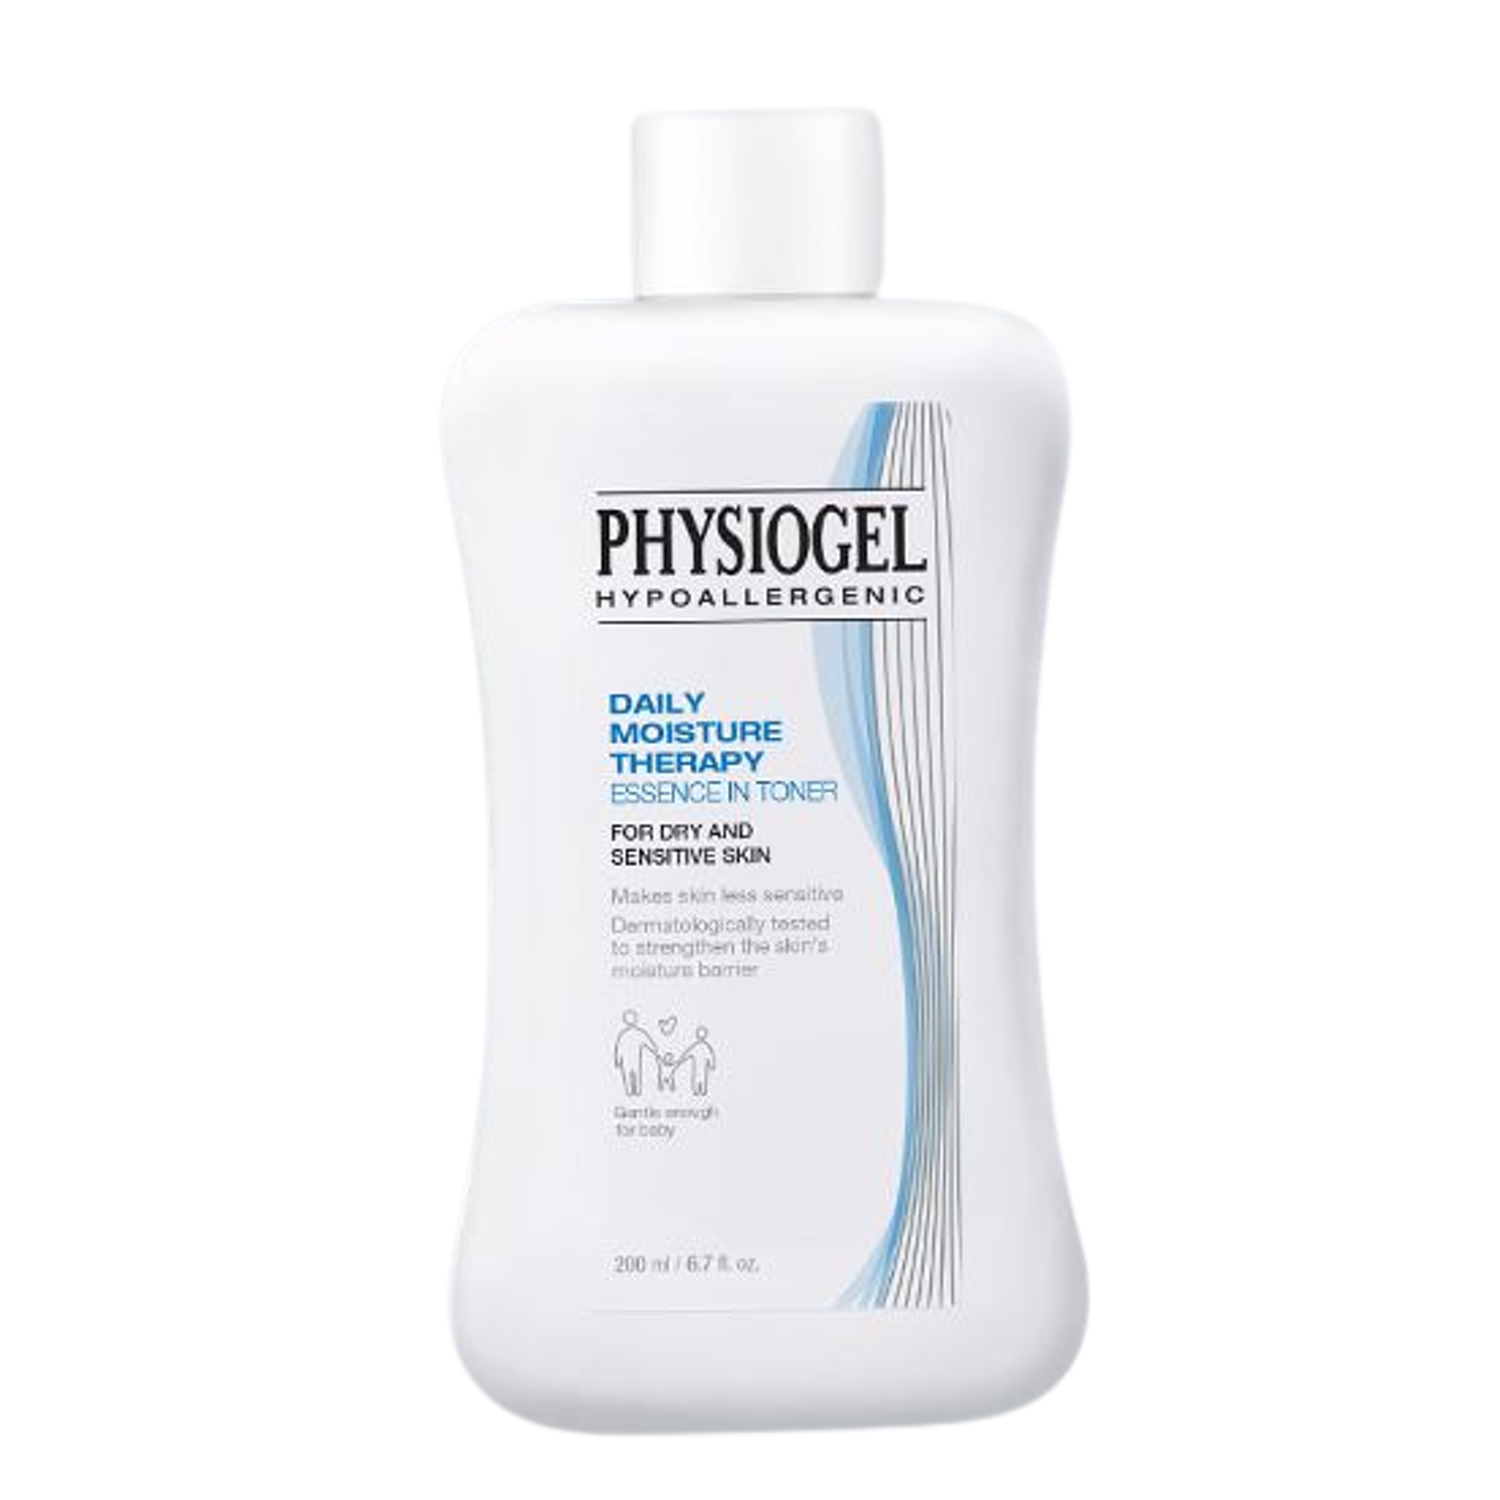 PHYSIOGEL Daily Moisture Therapy Essence In Toner 200ml - DODOSKIN